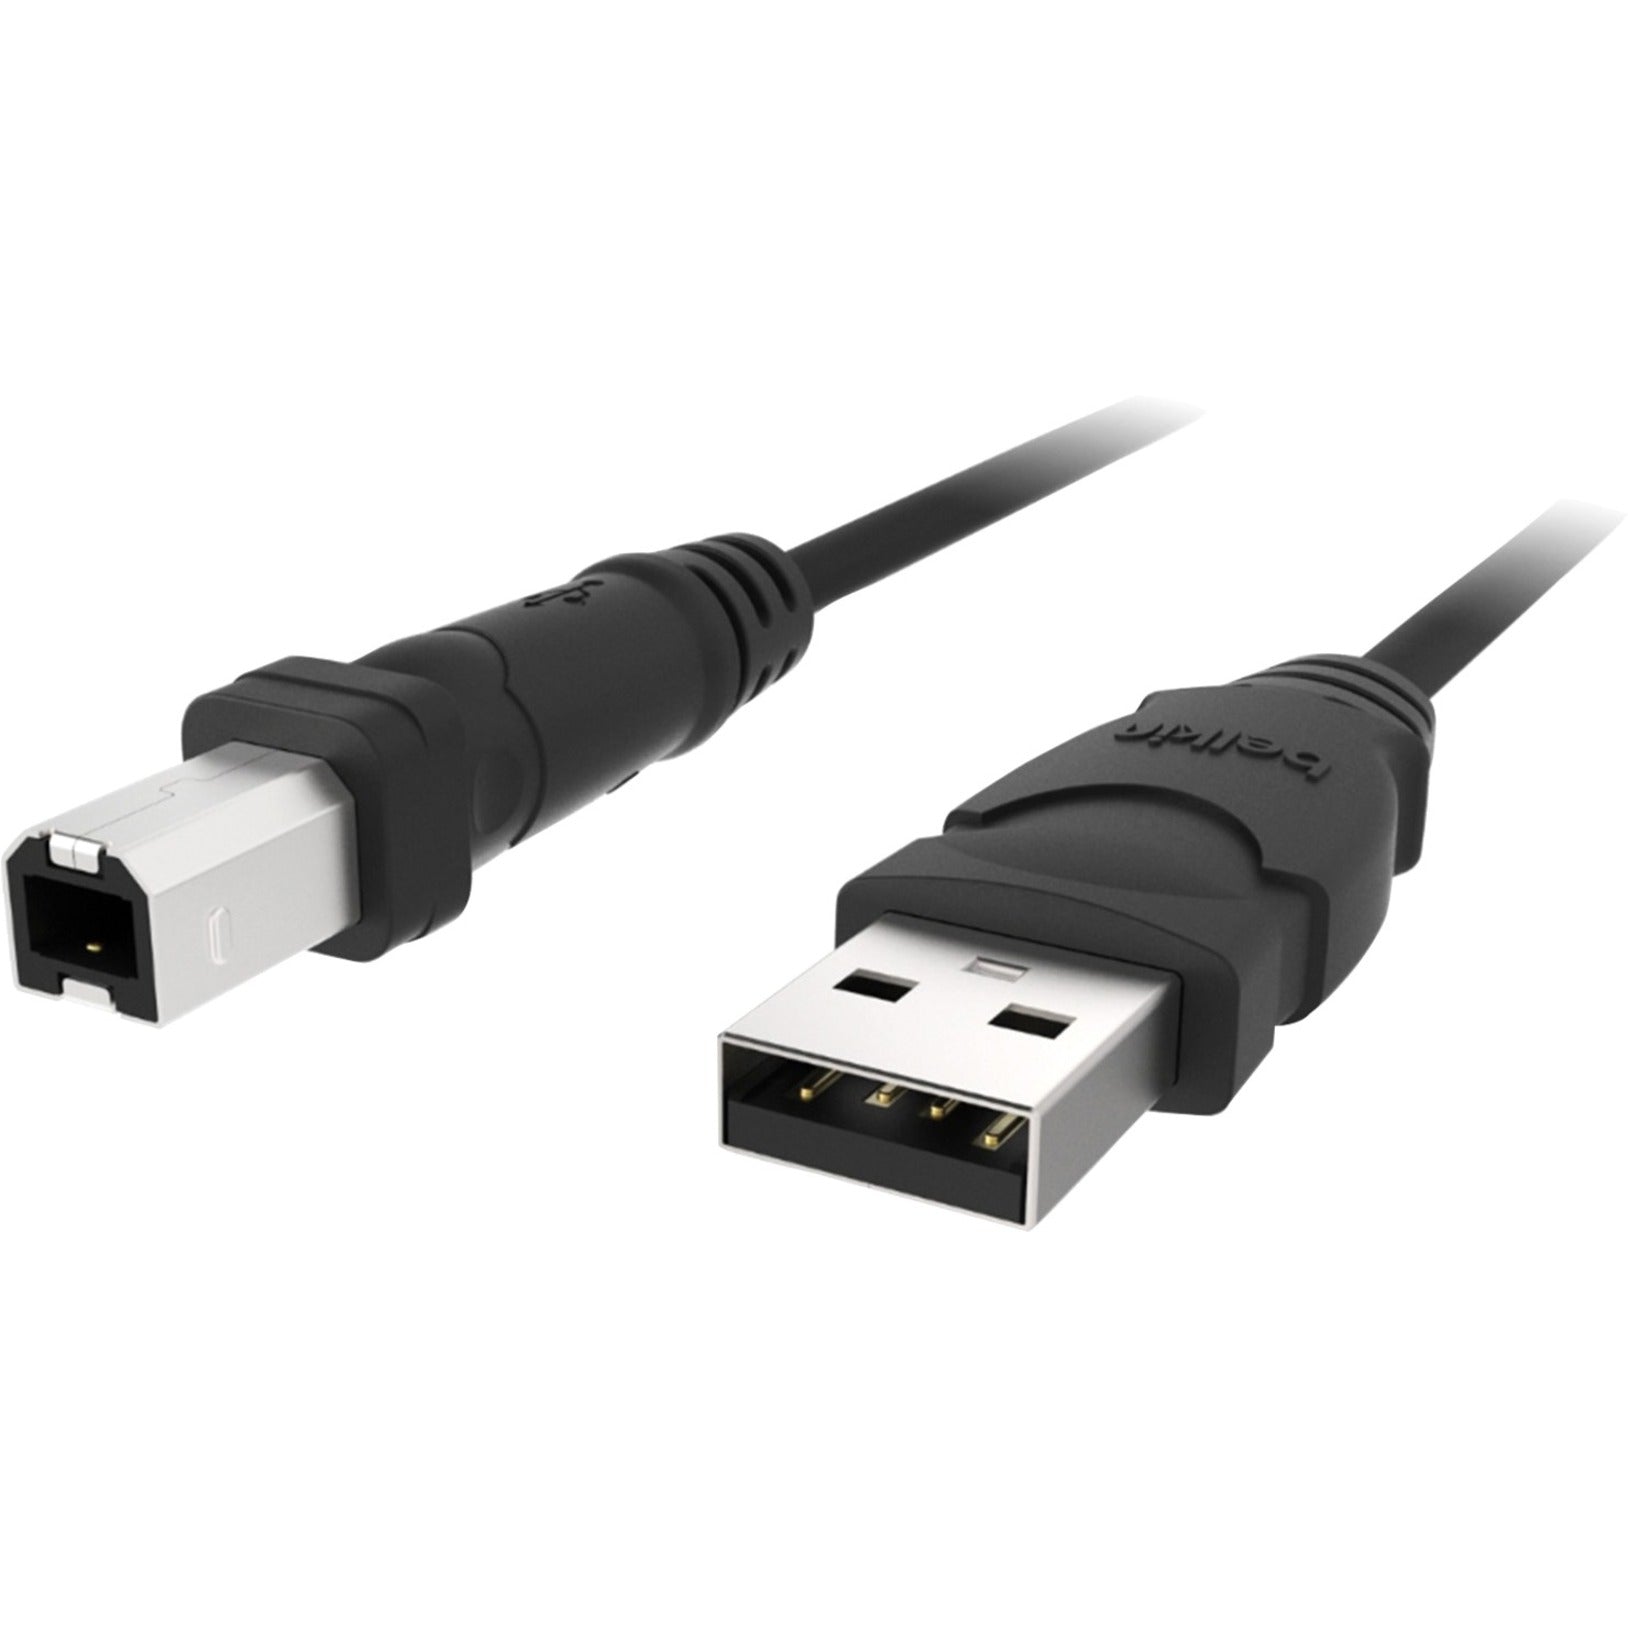 Belkin F3U133B10 USB Cable, 10 ft Data Transfer Cable